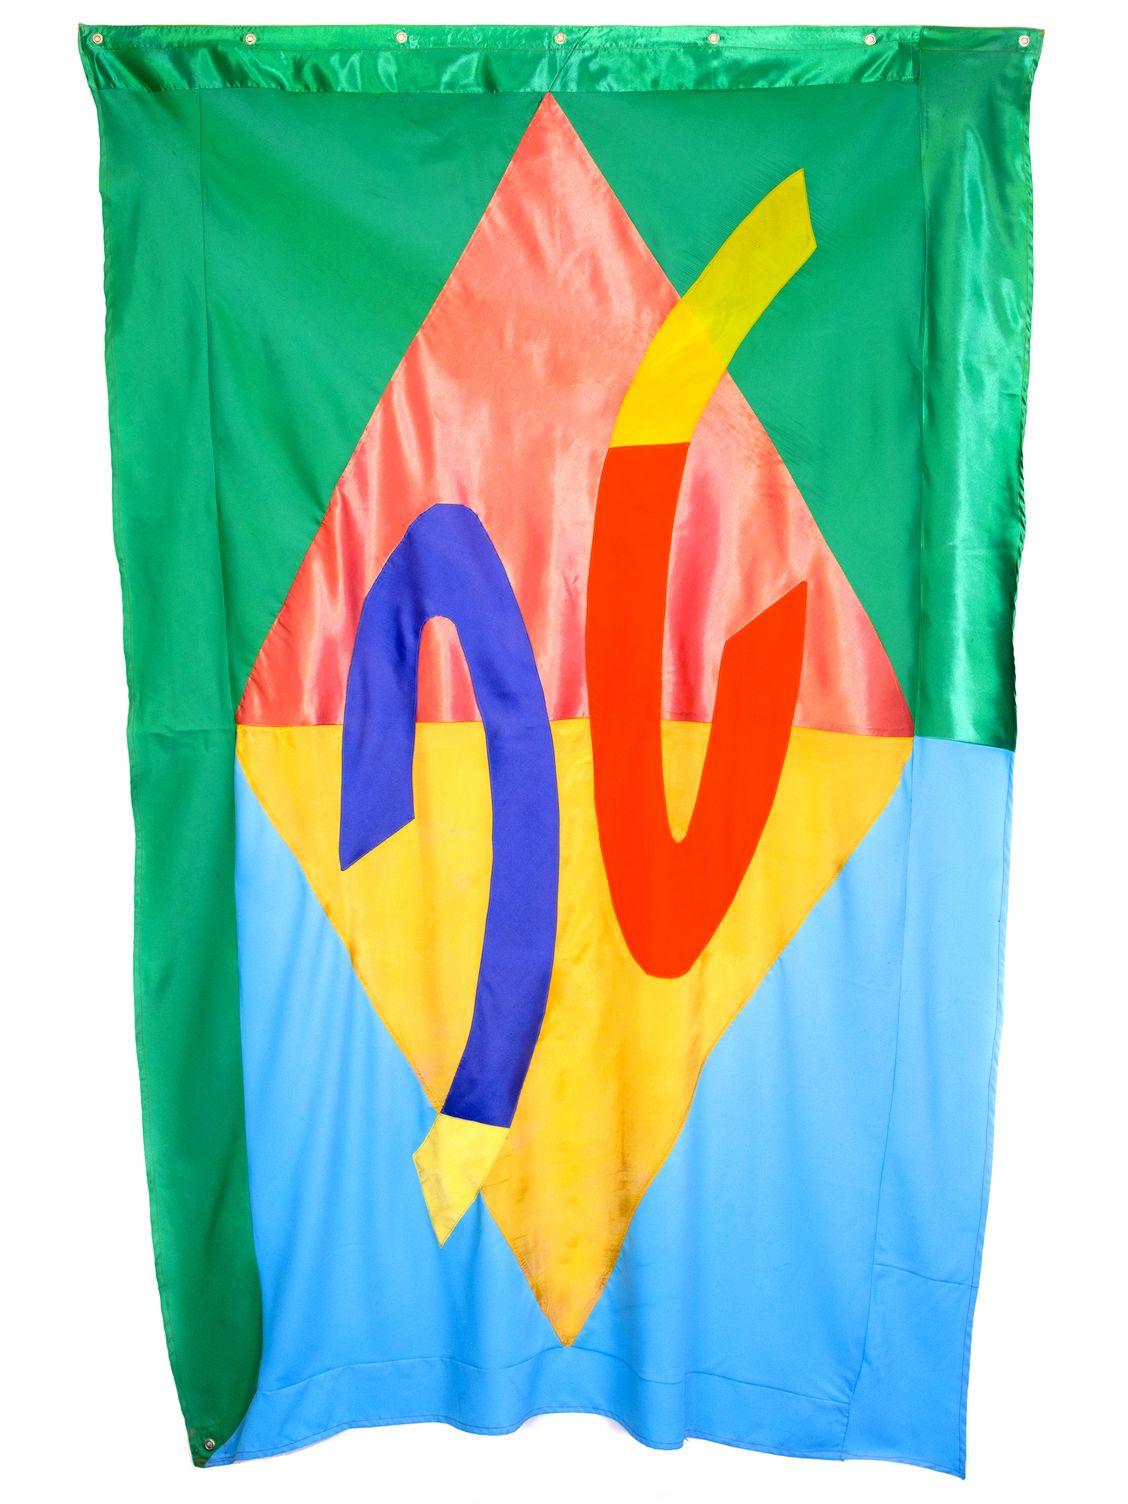 Green Earthness (2018), Flag by Claudia Hill